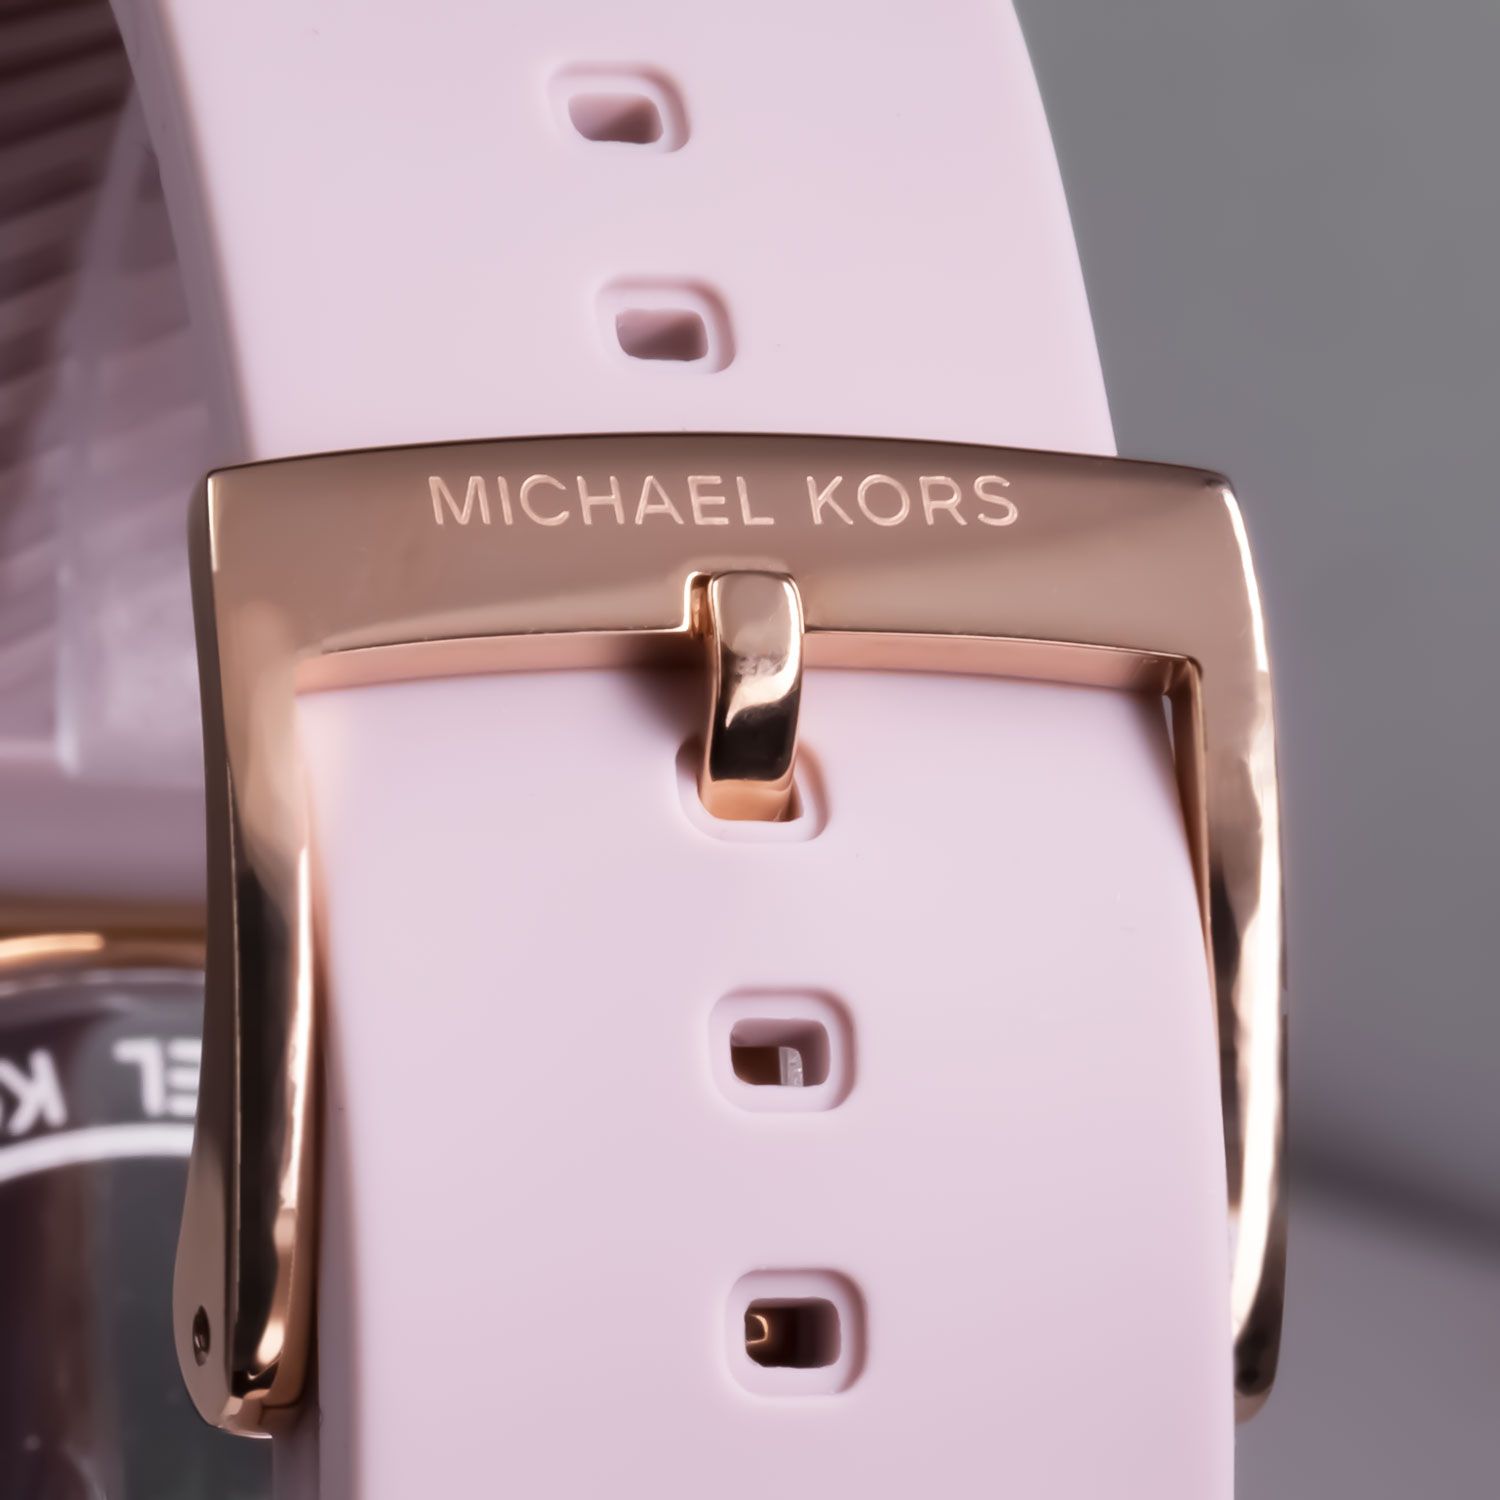 ĐỒNG HỒ ĐEO TAY NỮ MICHAEL KORS RUNWAY JANELLE ROSE GOLD PINK SILICONE WATCH MK7139 4